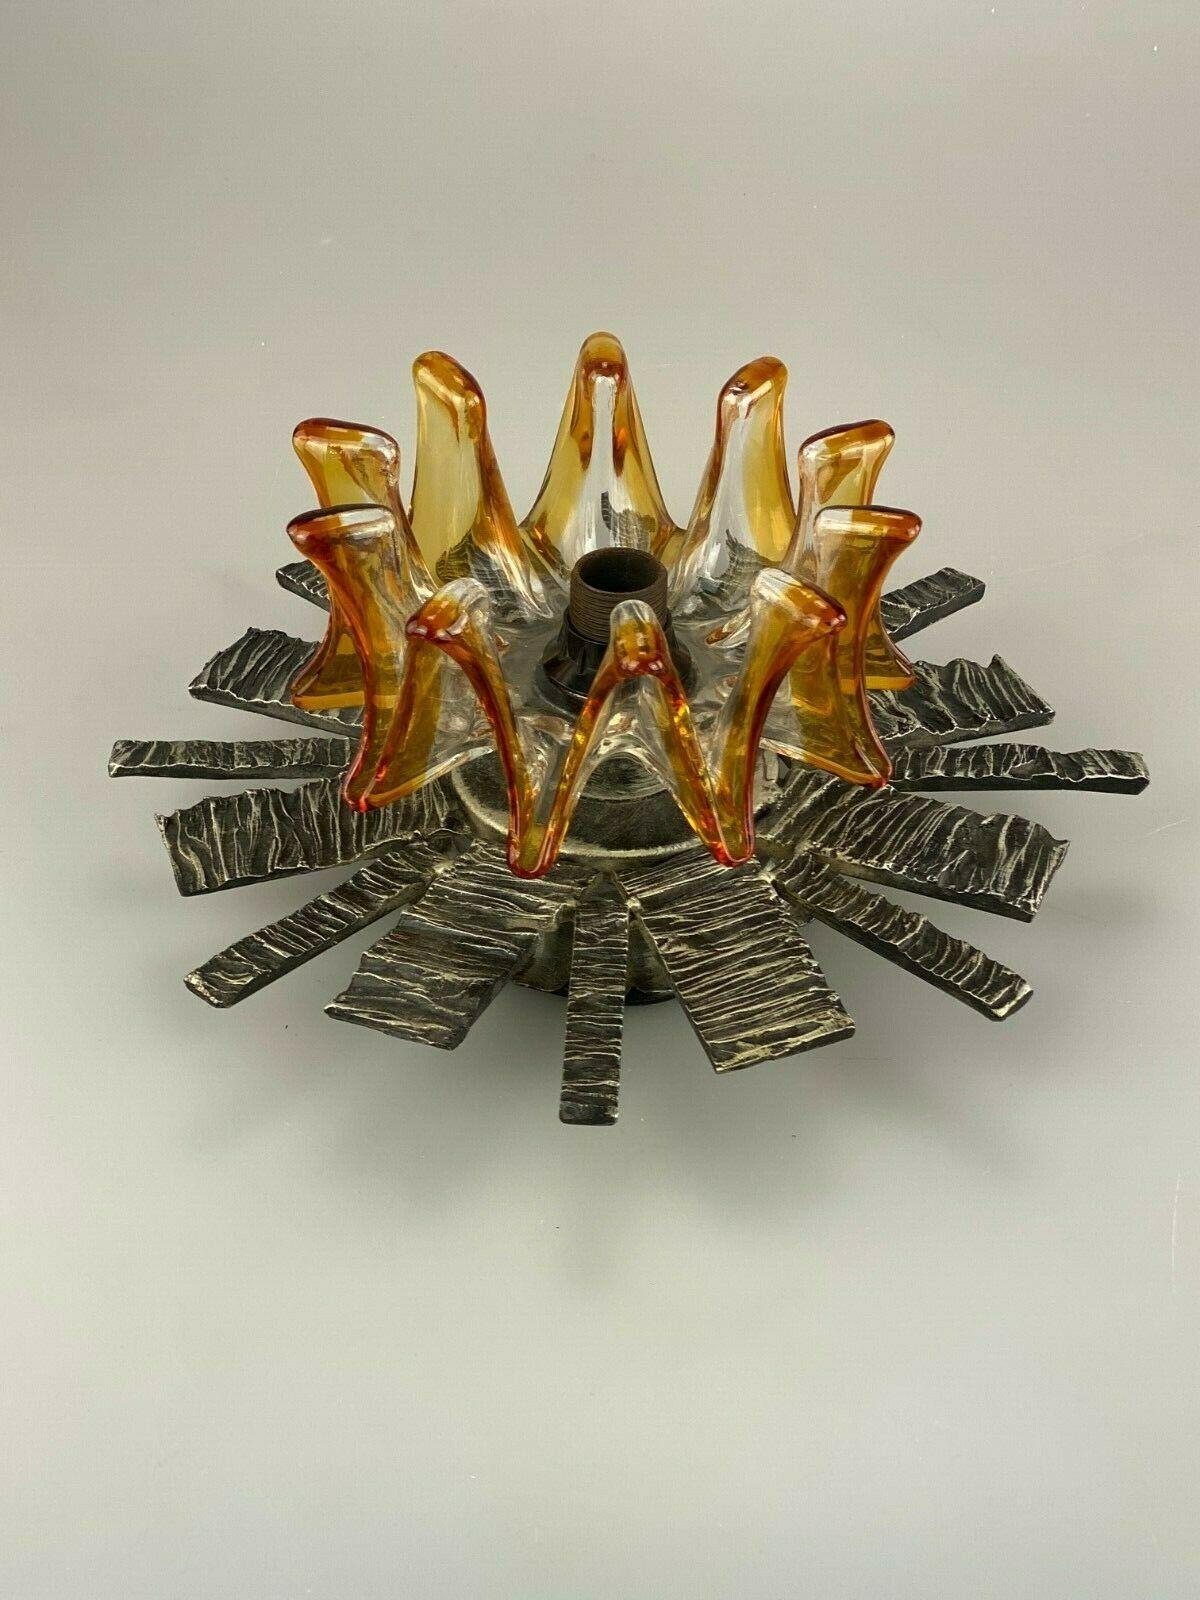 60s 70s Brutalist wall lamp sconce iron & glass wall lamp 60s 70s.

Object: wall lamp

Manufacturer:

Condition: good - vintage

Age: around 1960-1970

Dimensions:

Diameter = 31cm
Height = 14cm

Other notes:

The pictures serve as